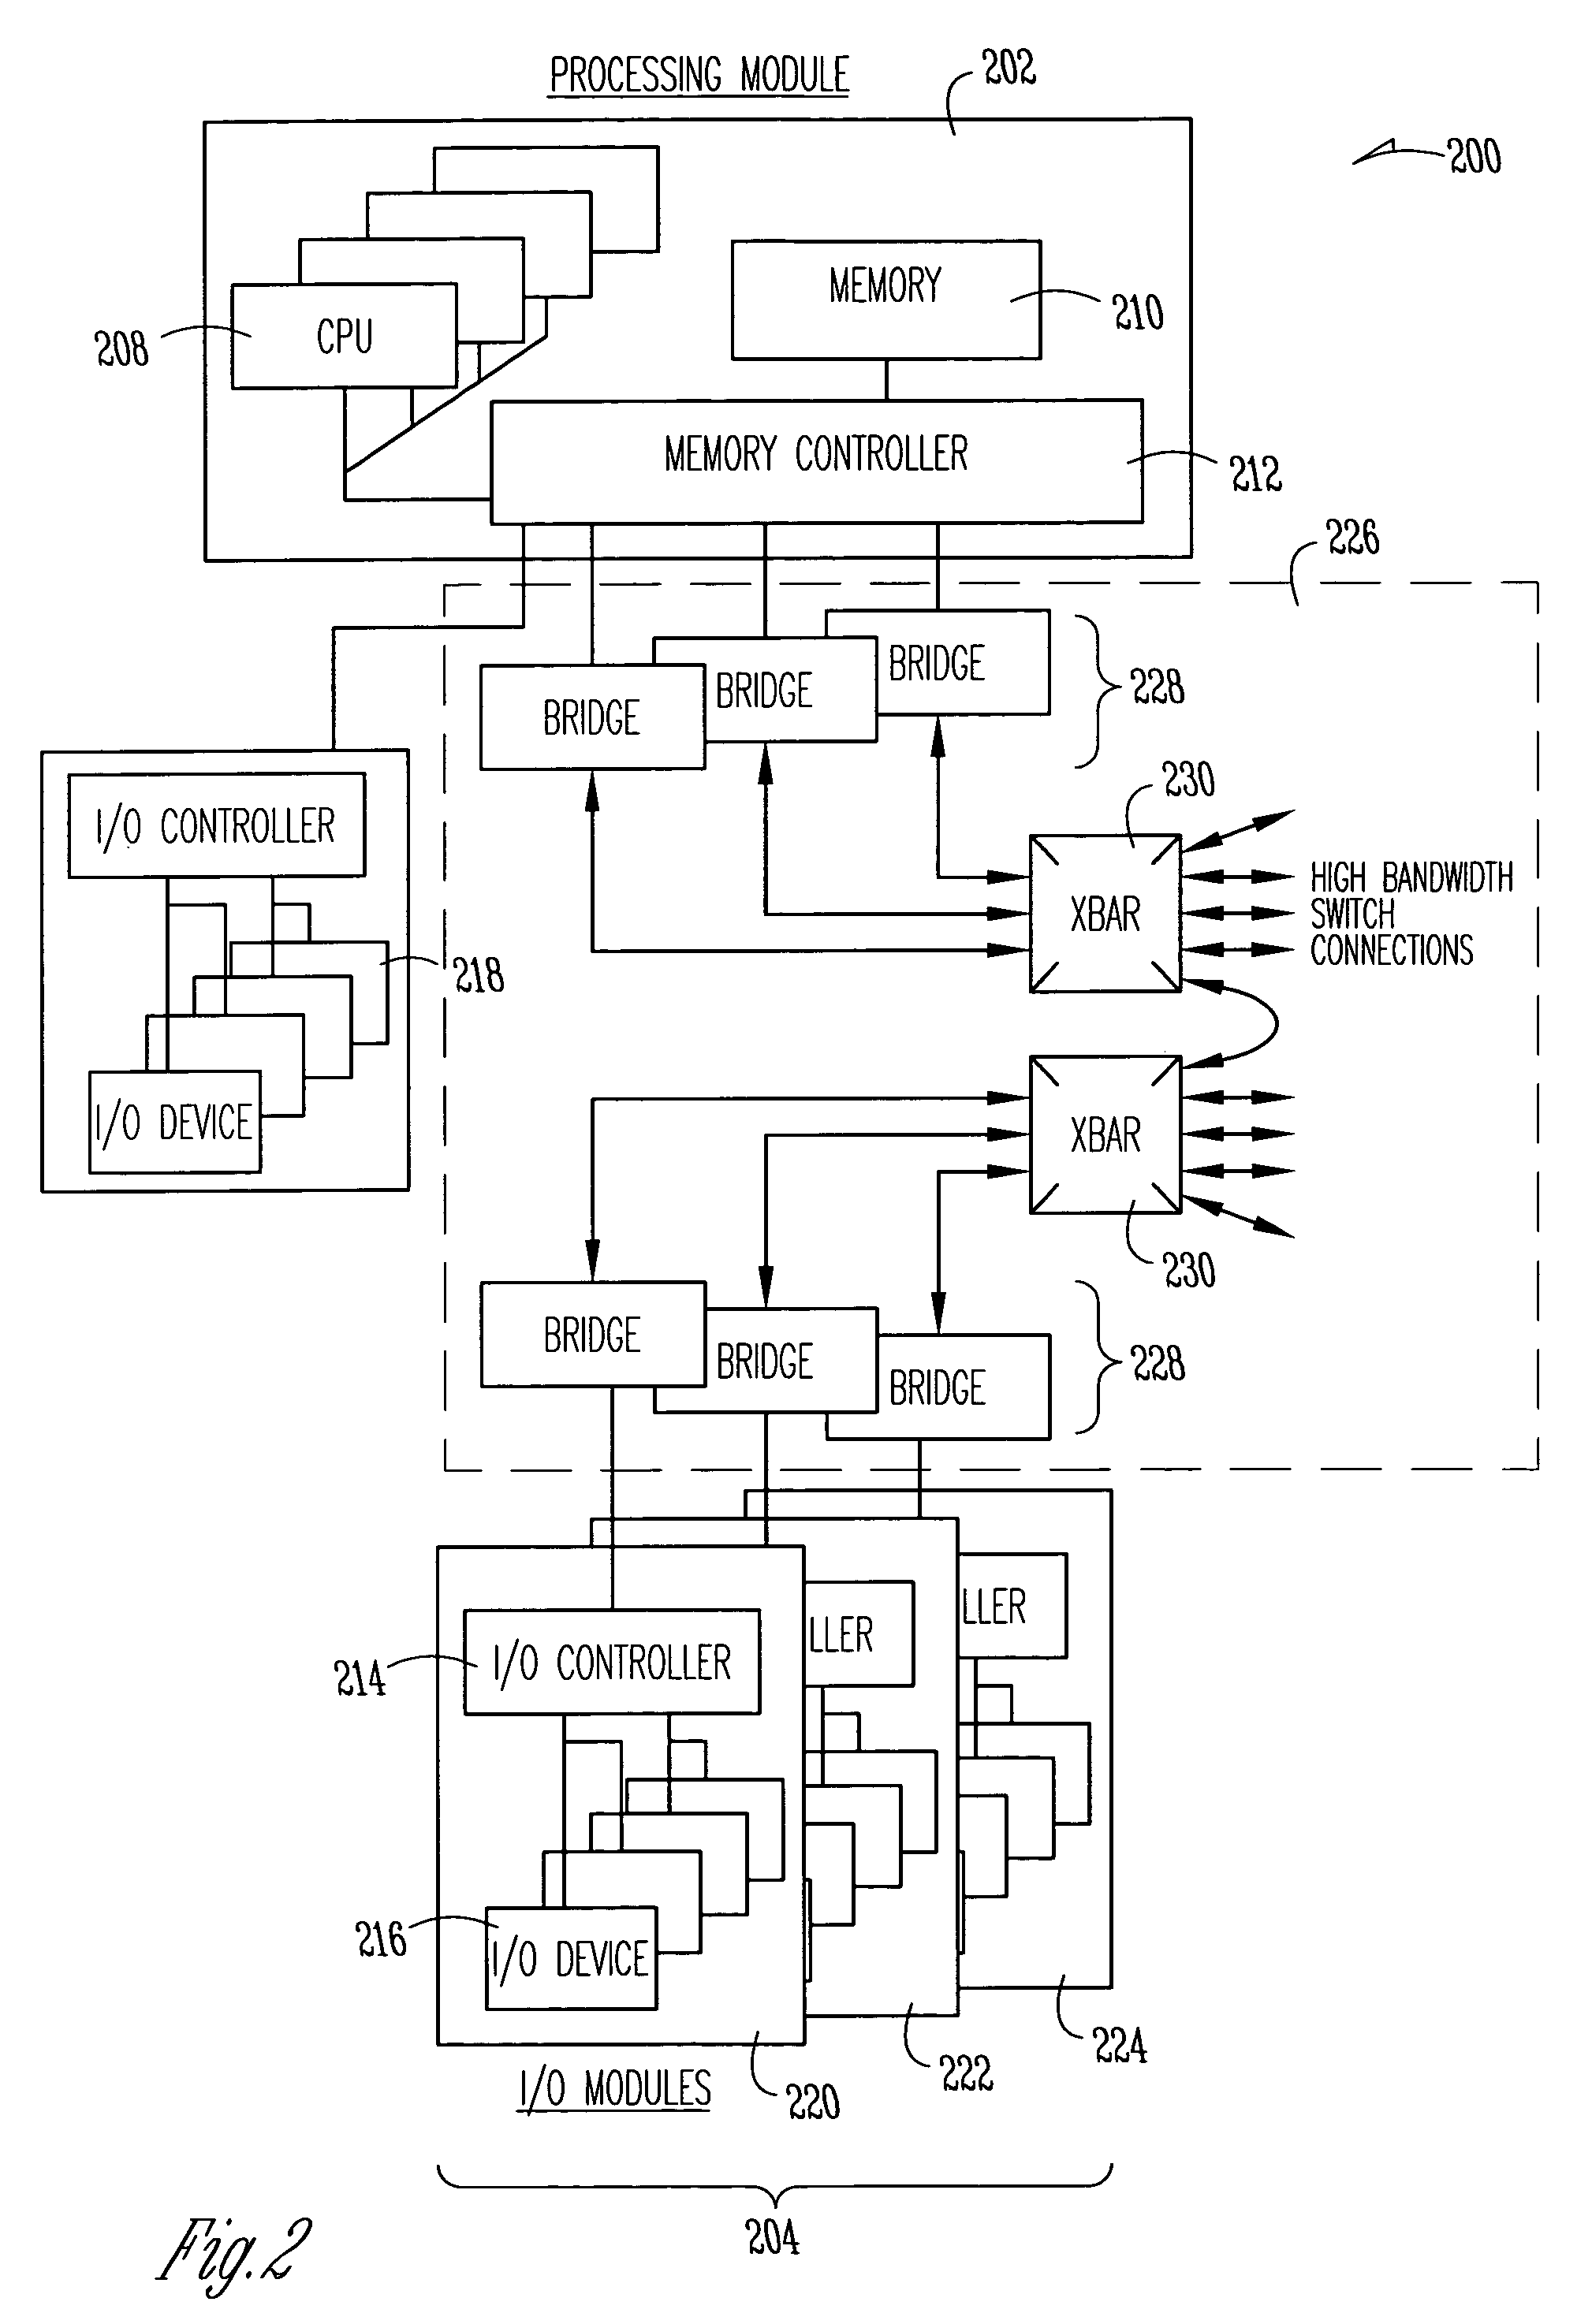 Scalable distributed memory and I/O multiprocessor system